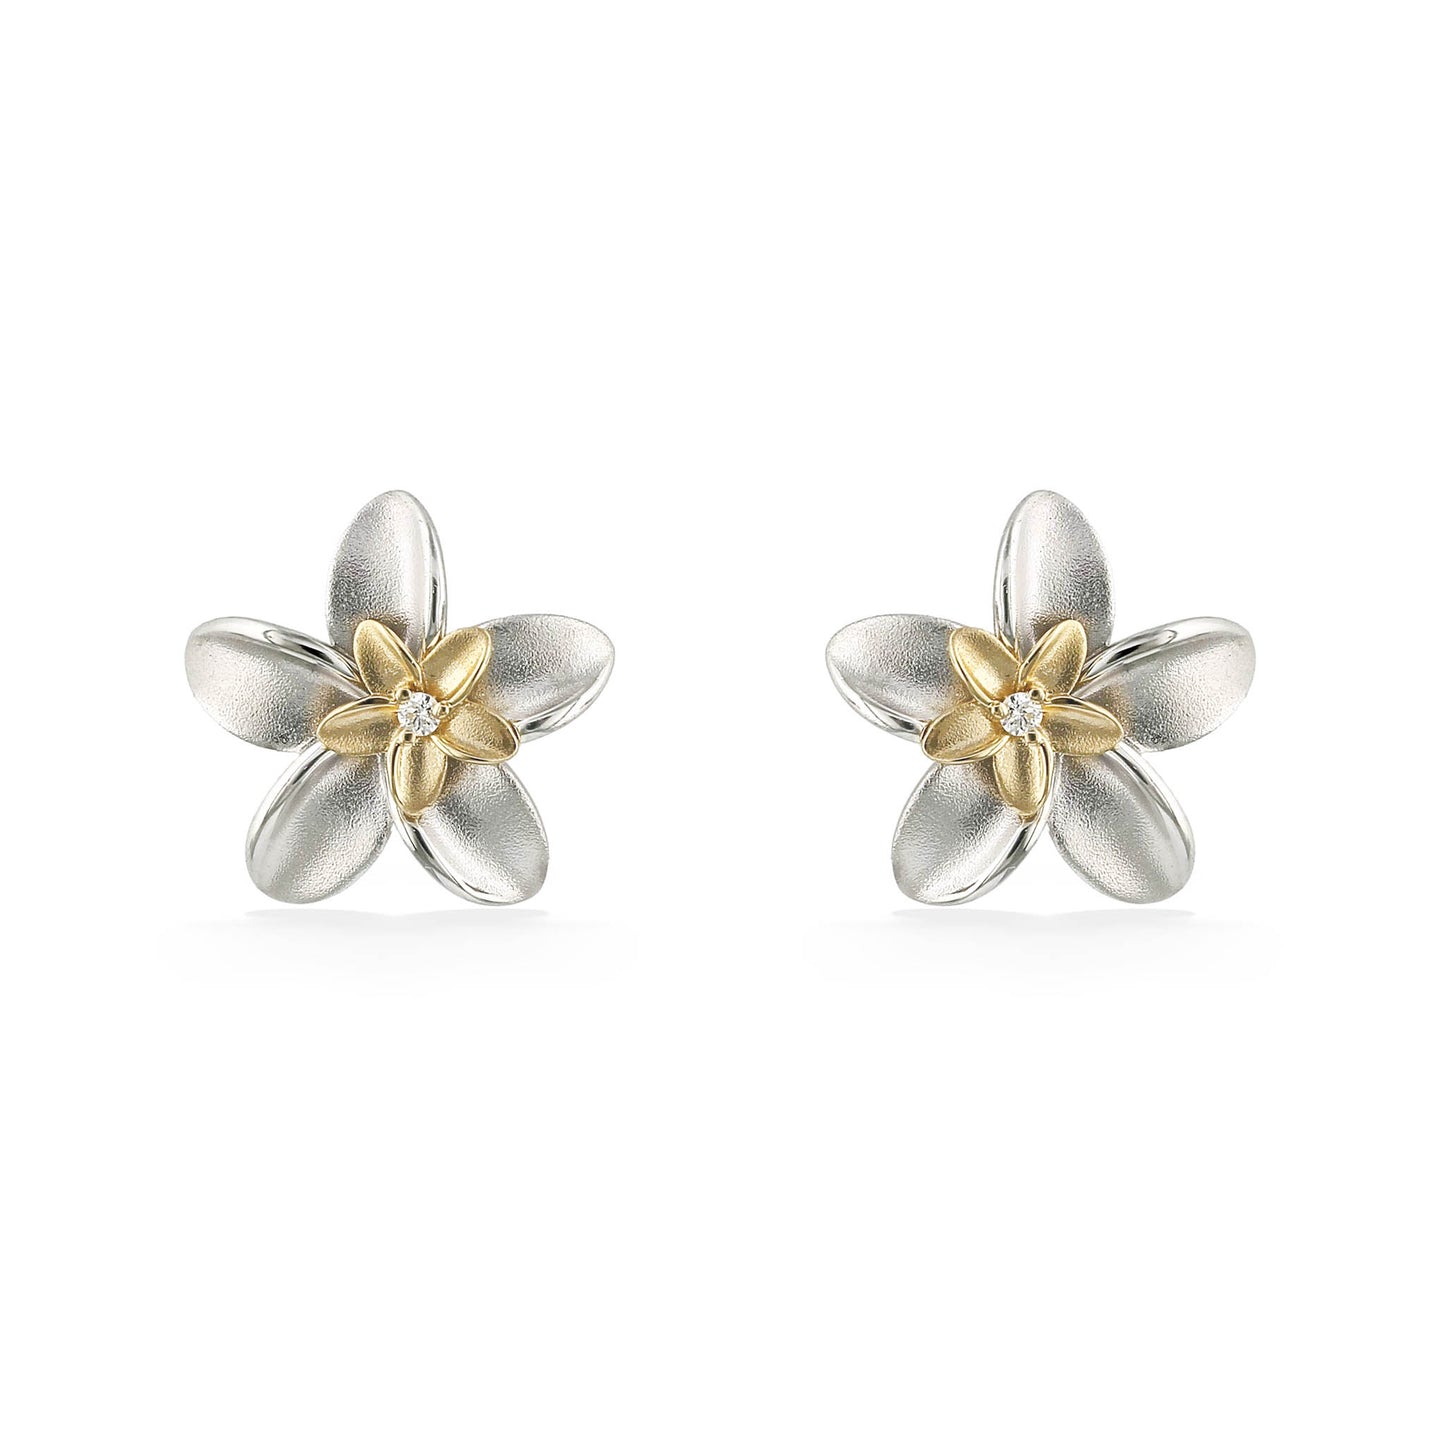 44804 - 14K Yellow Gold and Sterling Silver - Double Plumeria Stud Earrings